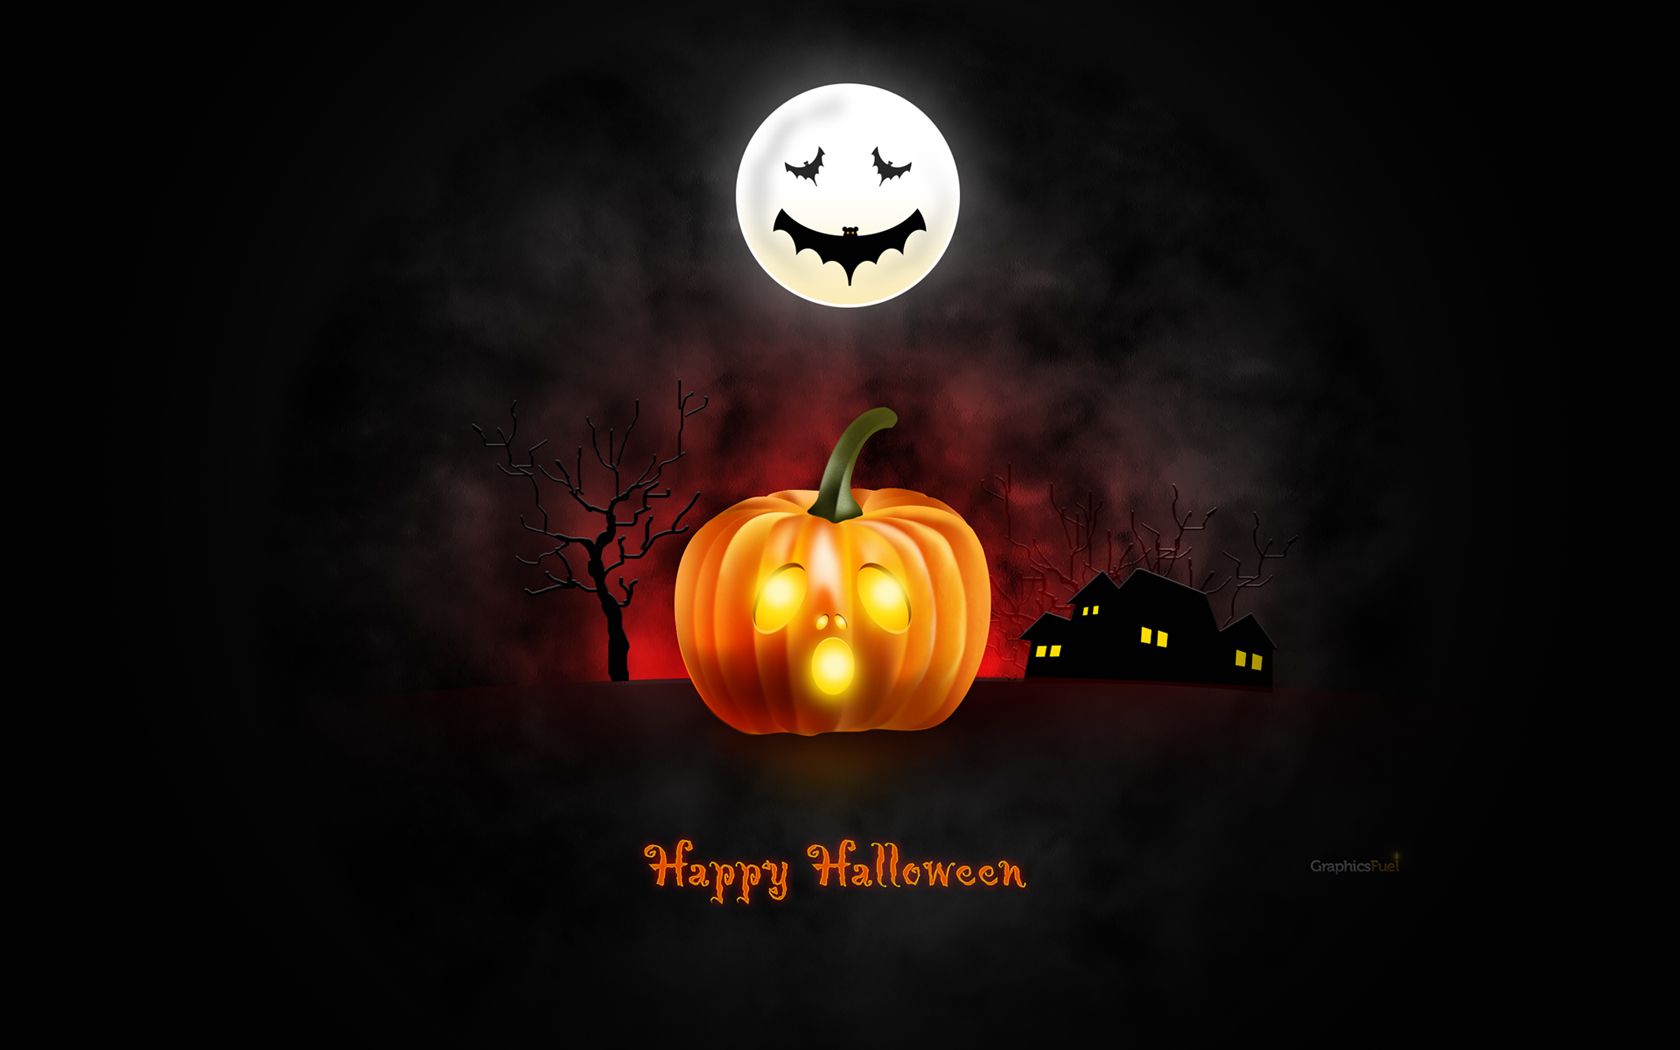 Halloween wallpaper for desktop, iPad & iPhone (PSD & icons included)